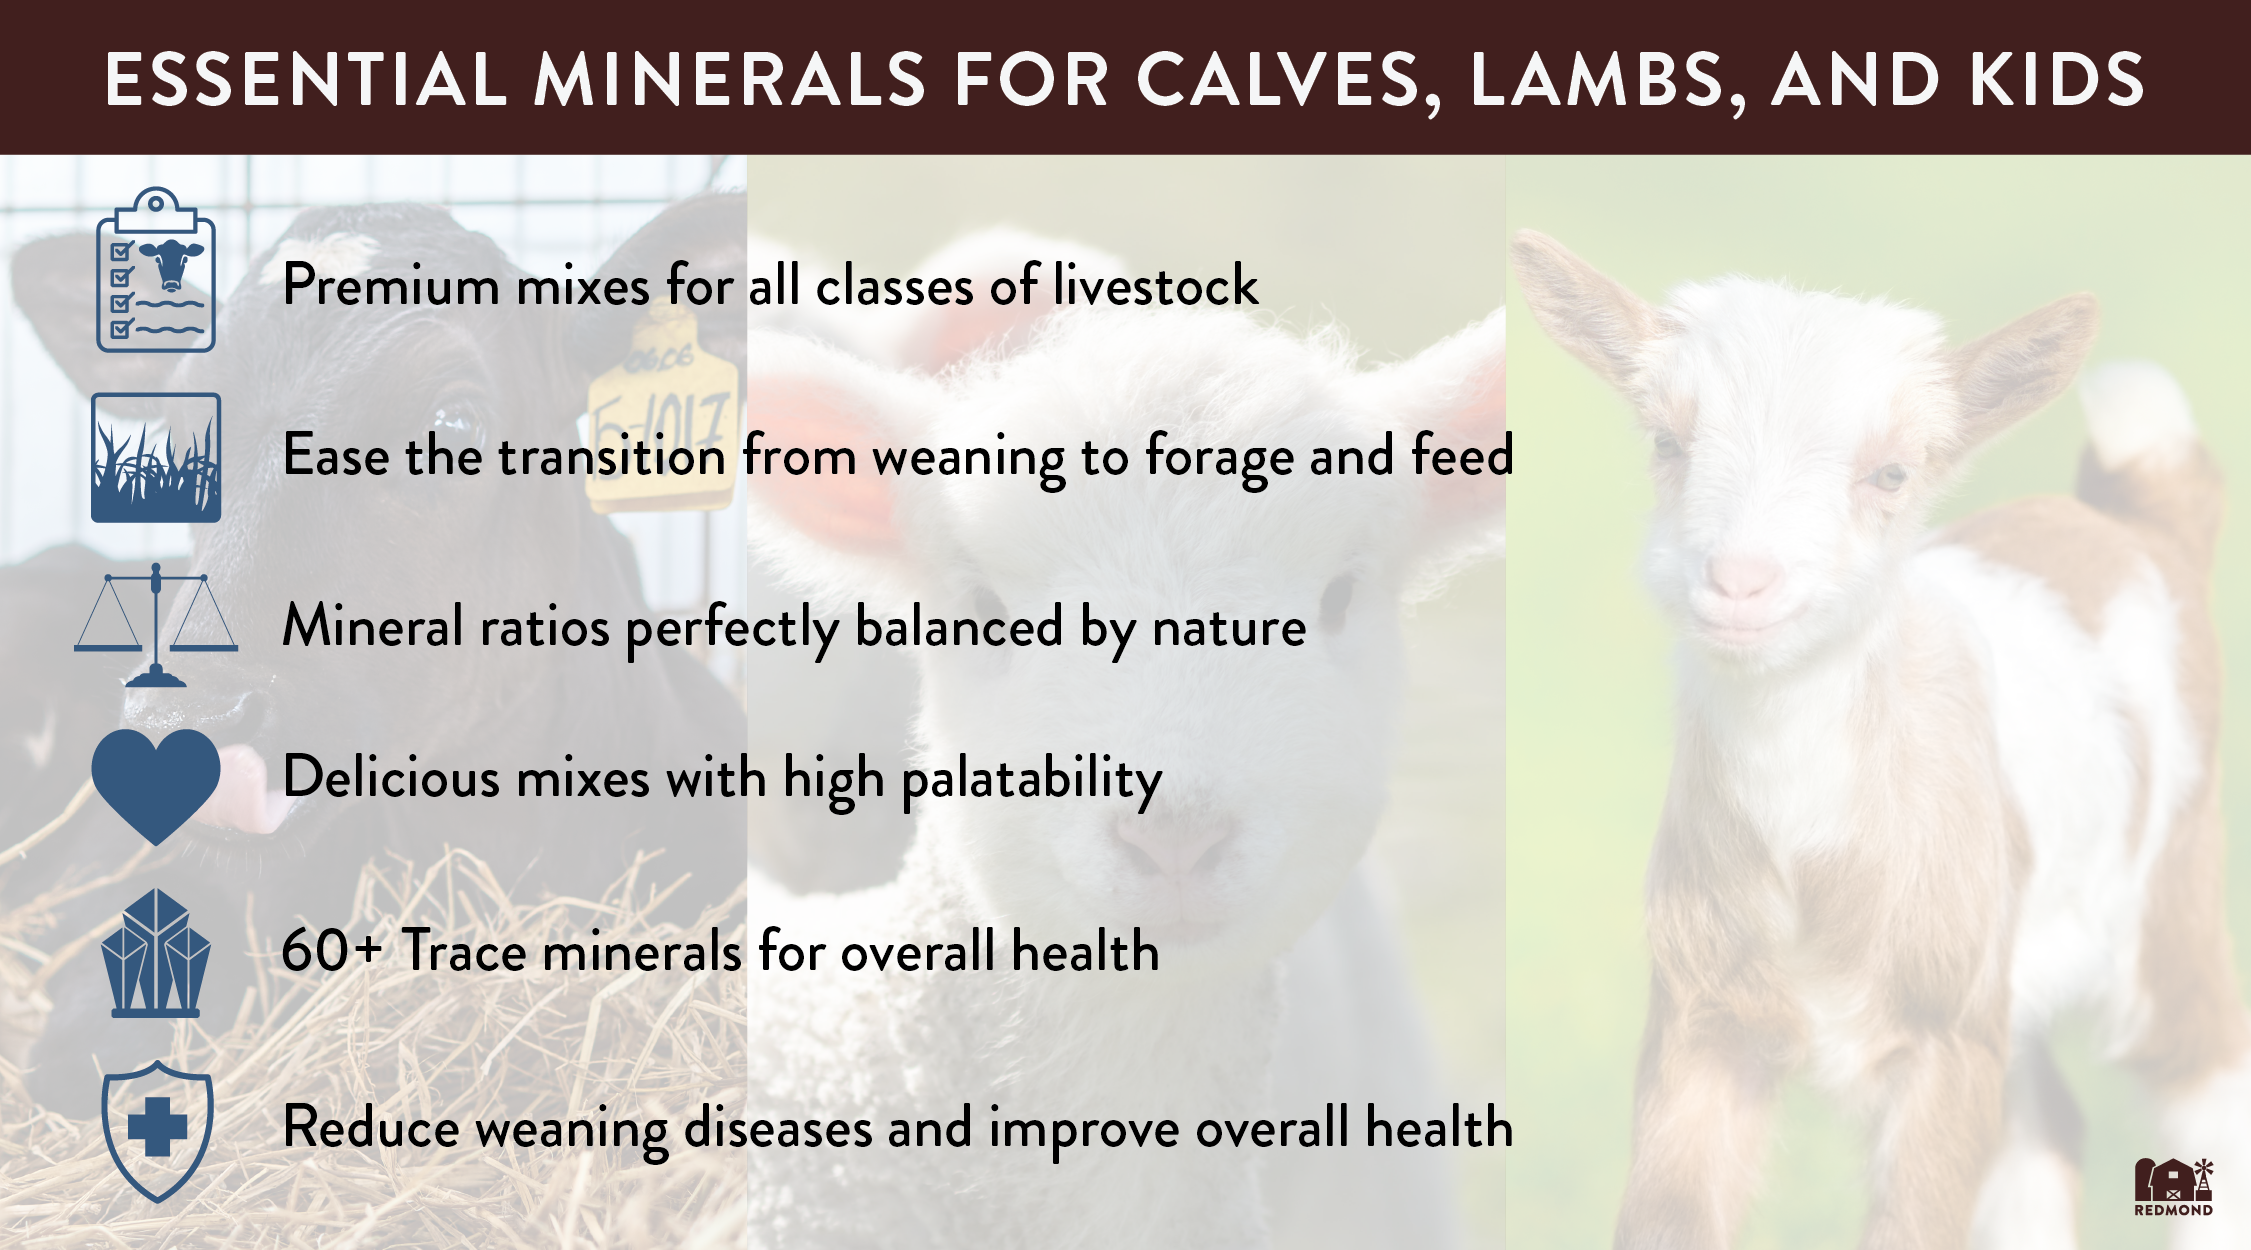 Essential minerals for calves, lambs, and goat kids